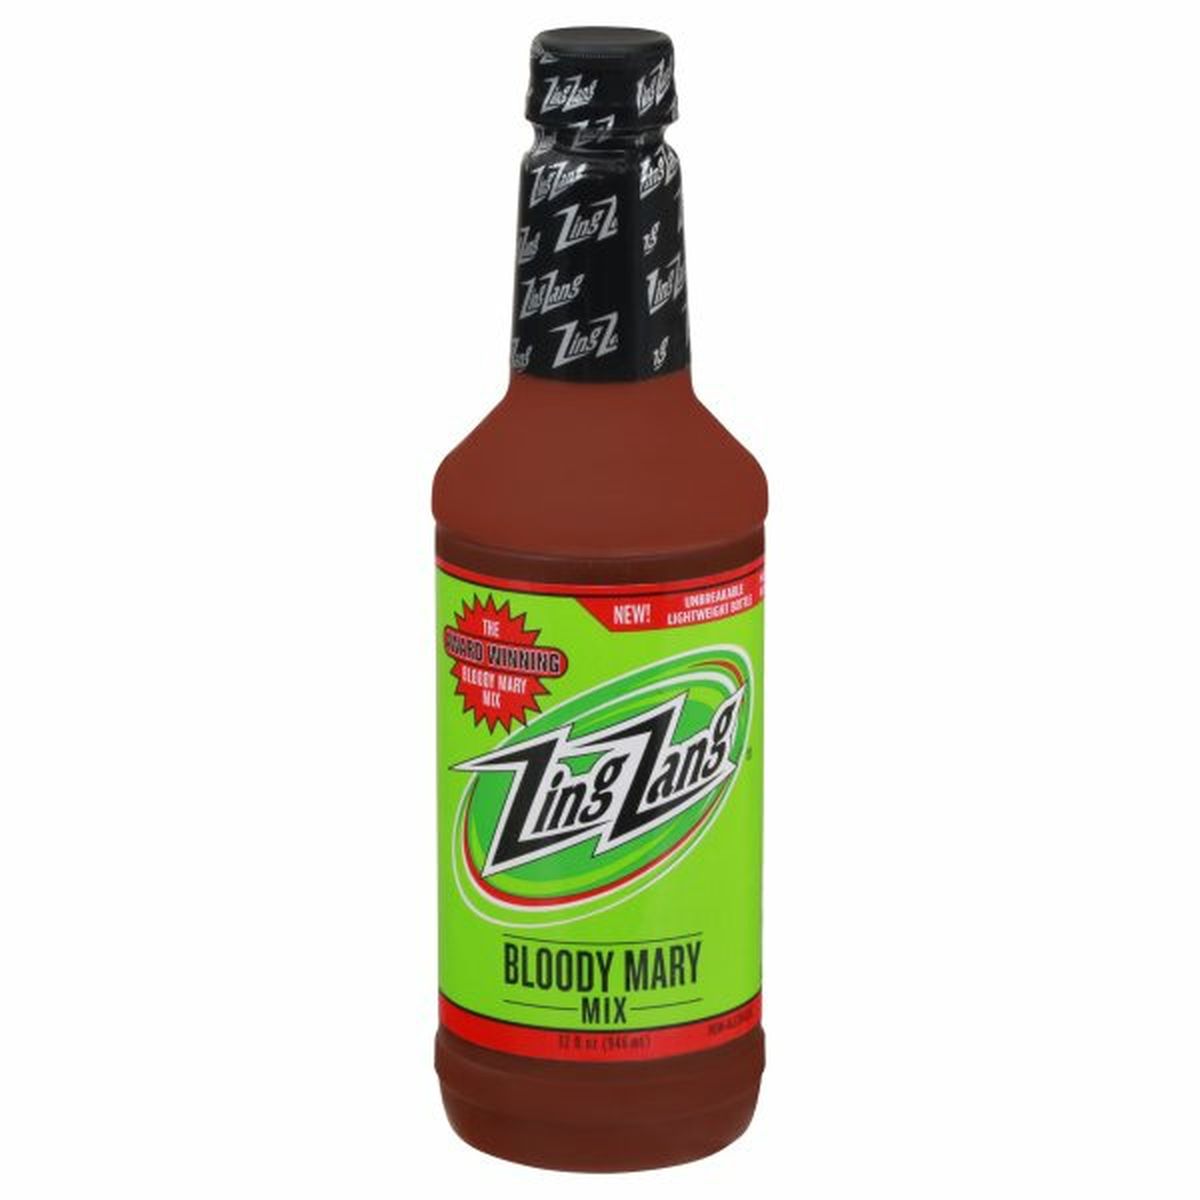 Calories in Zing Zang Bloody Mary Mix